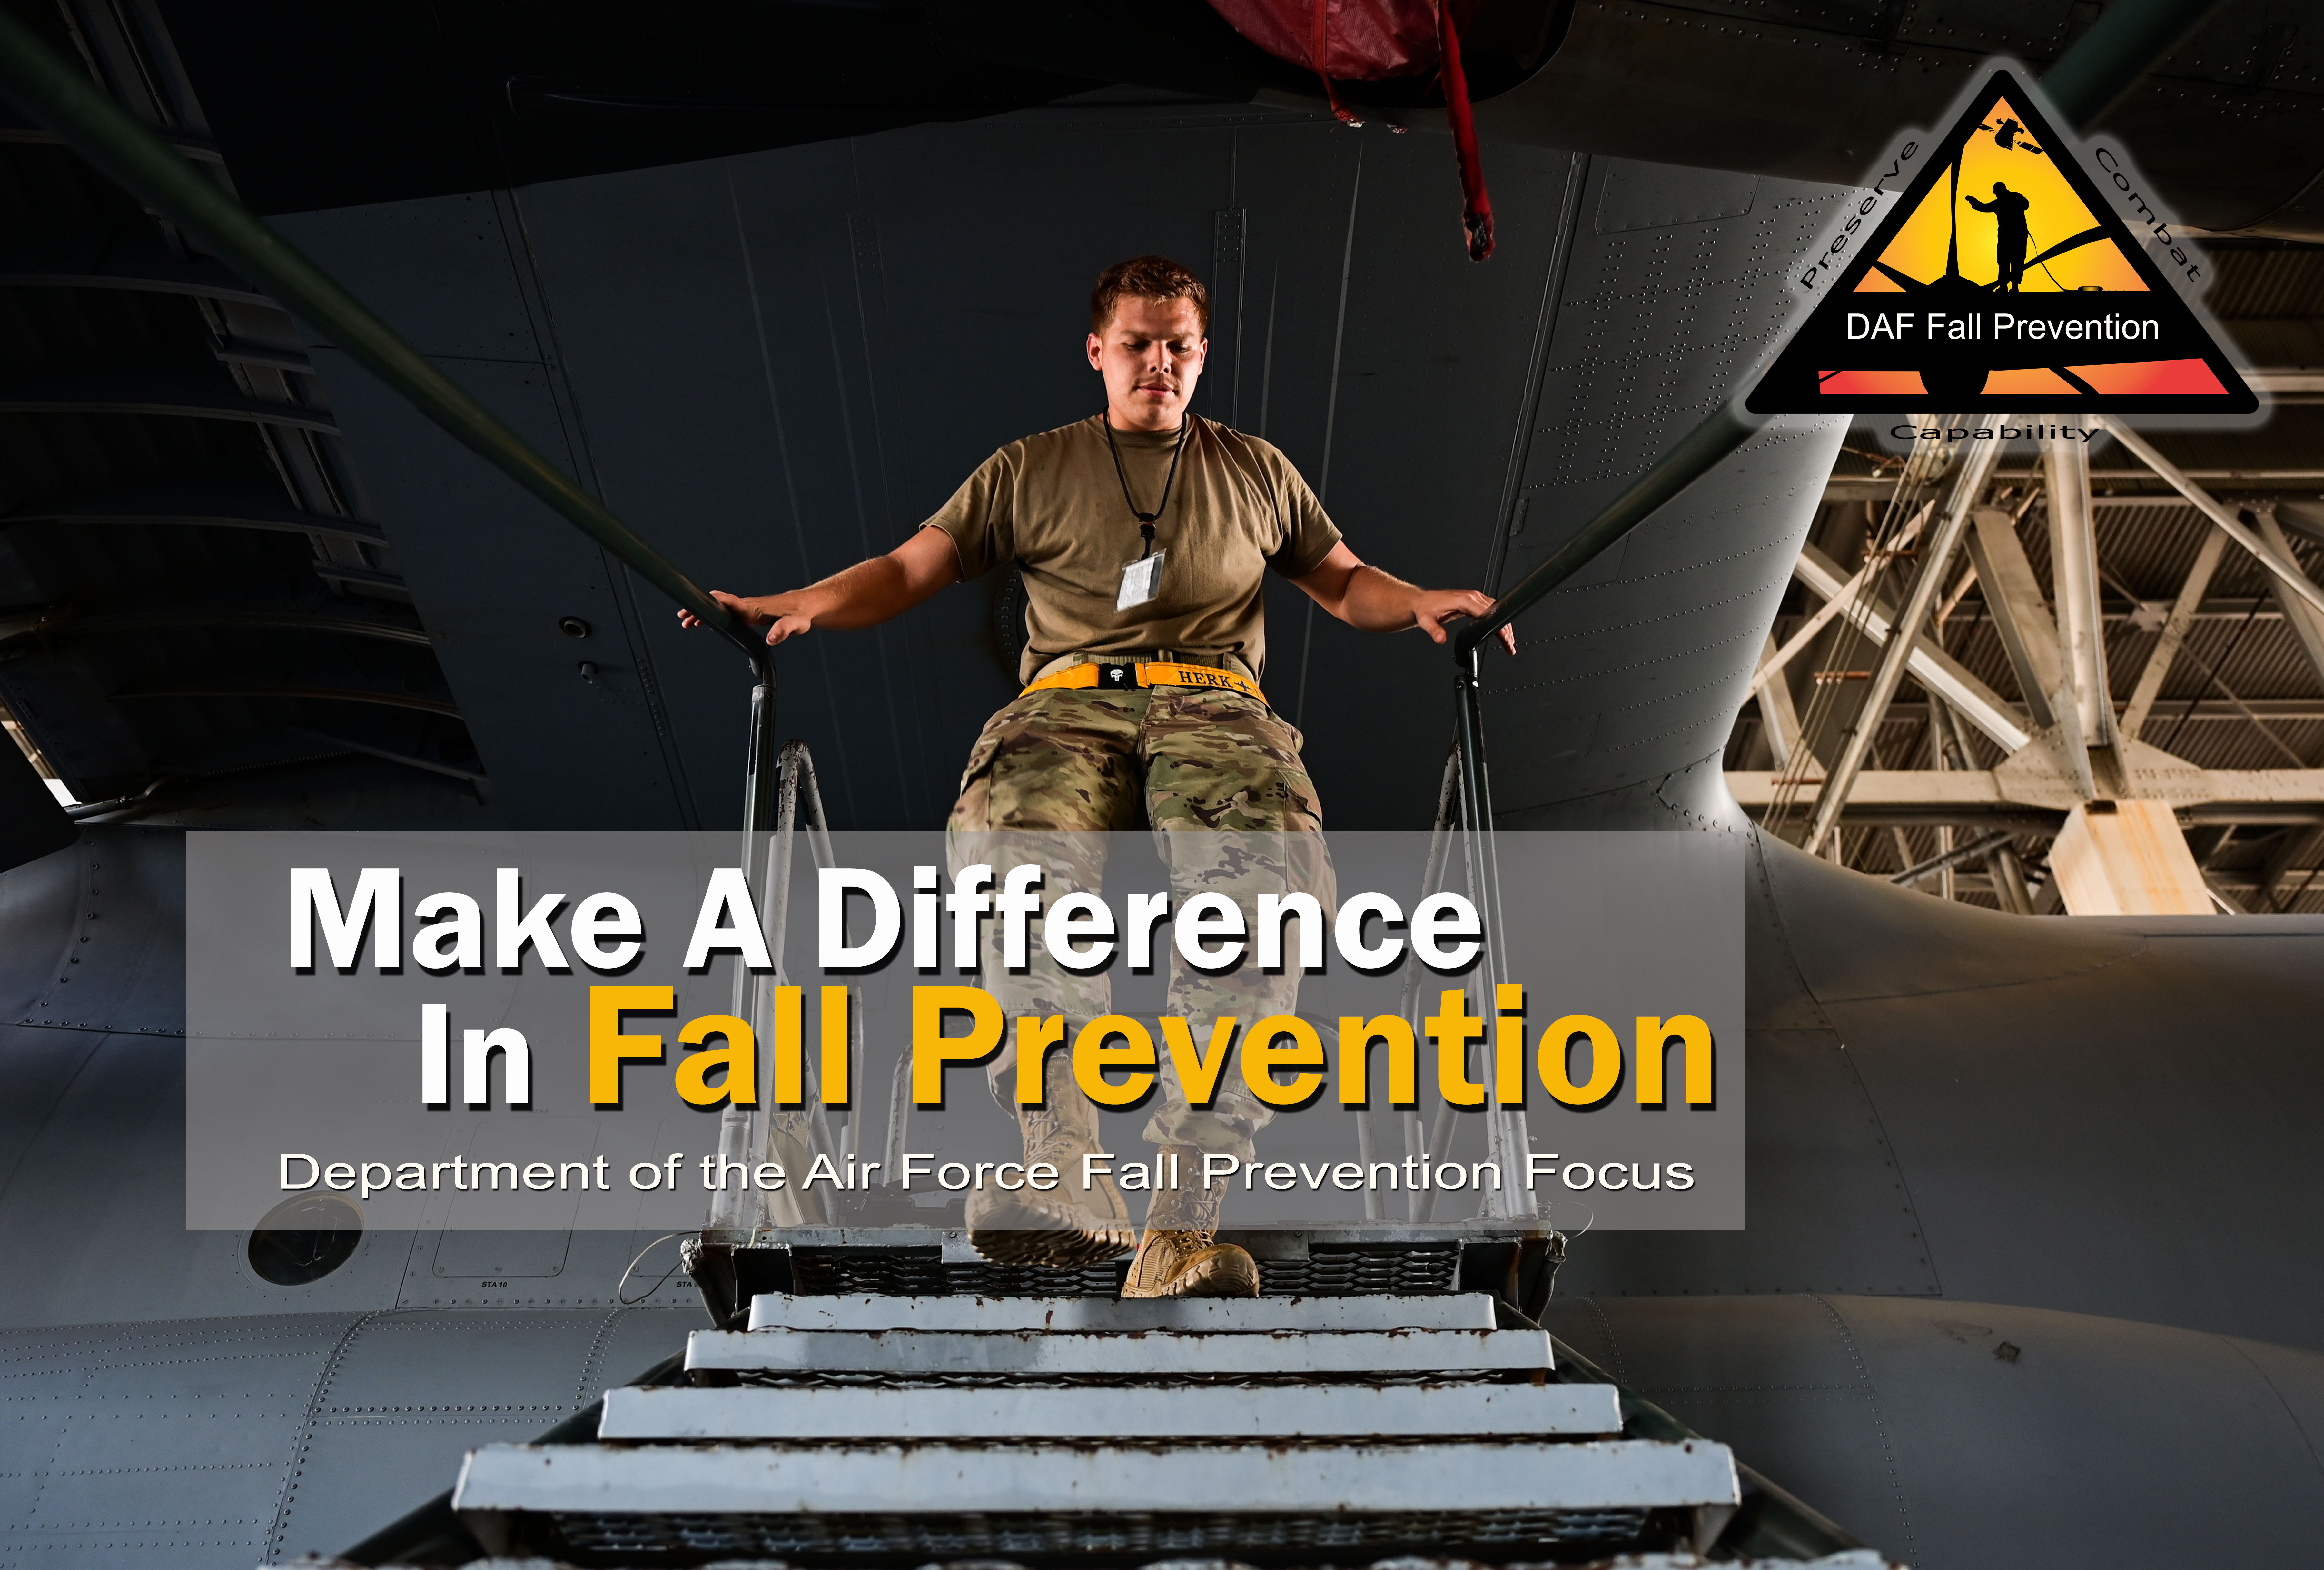 Make A Difference In Fall Prevention - Airman walking down aircraft steps